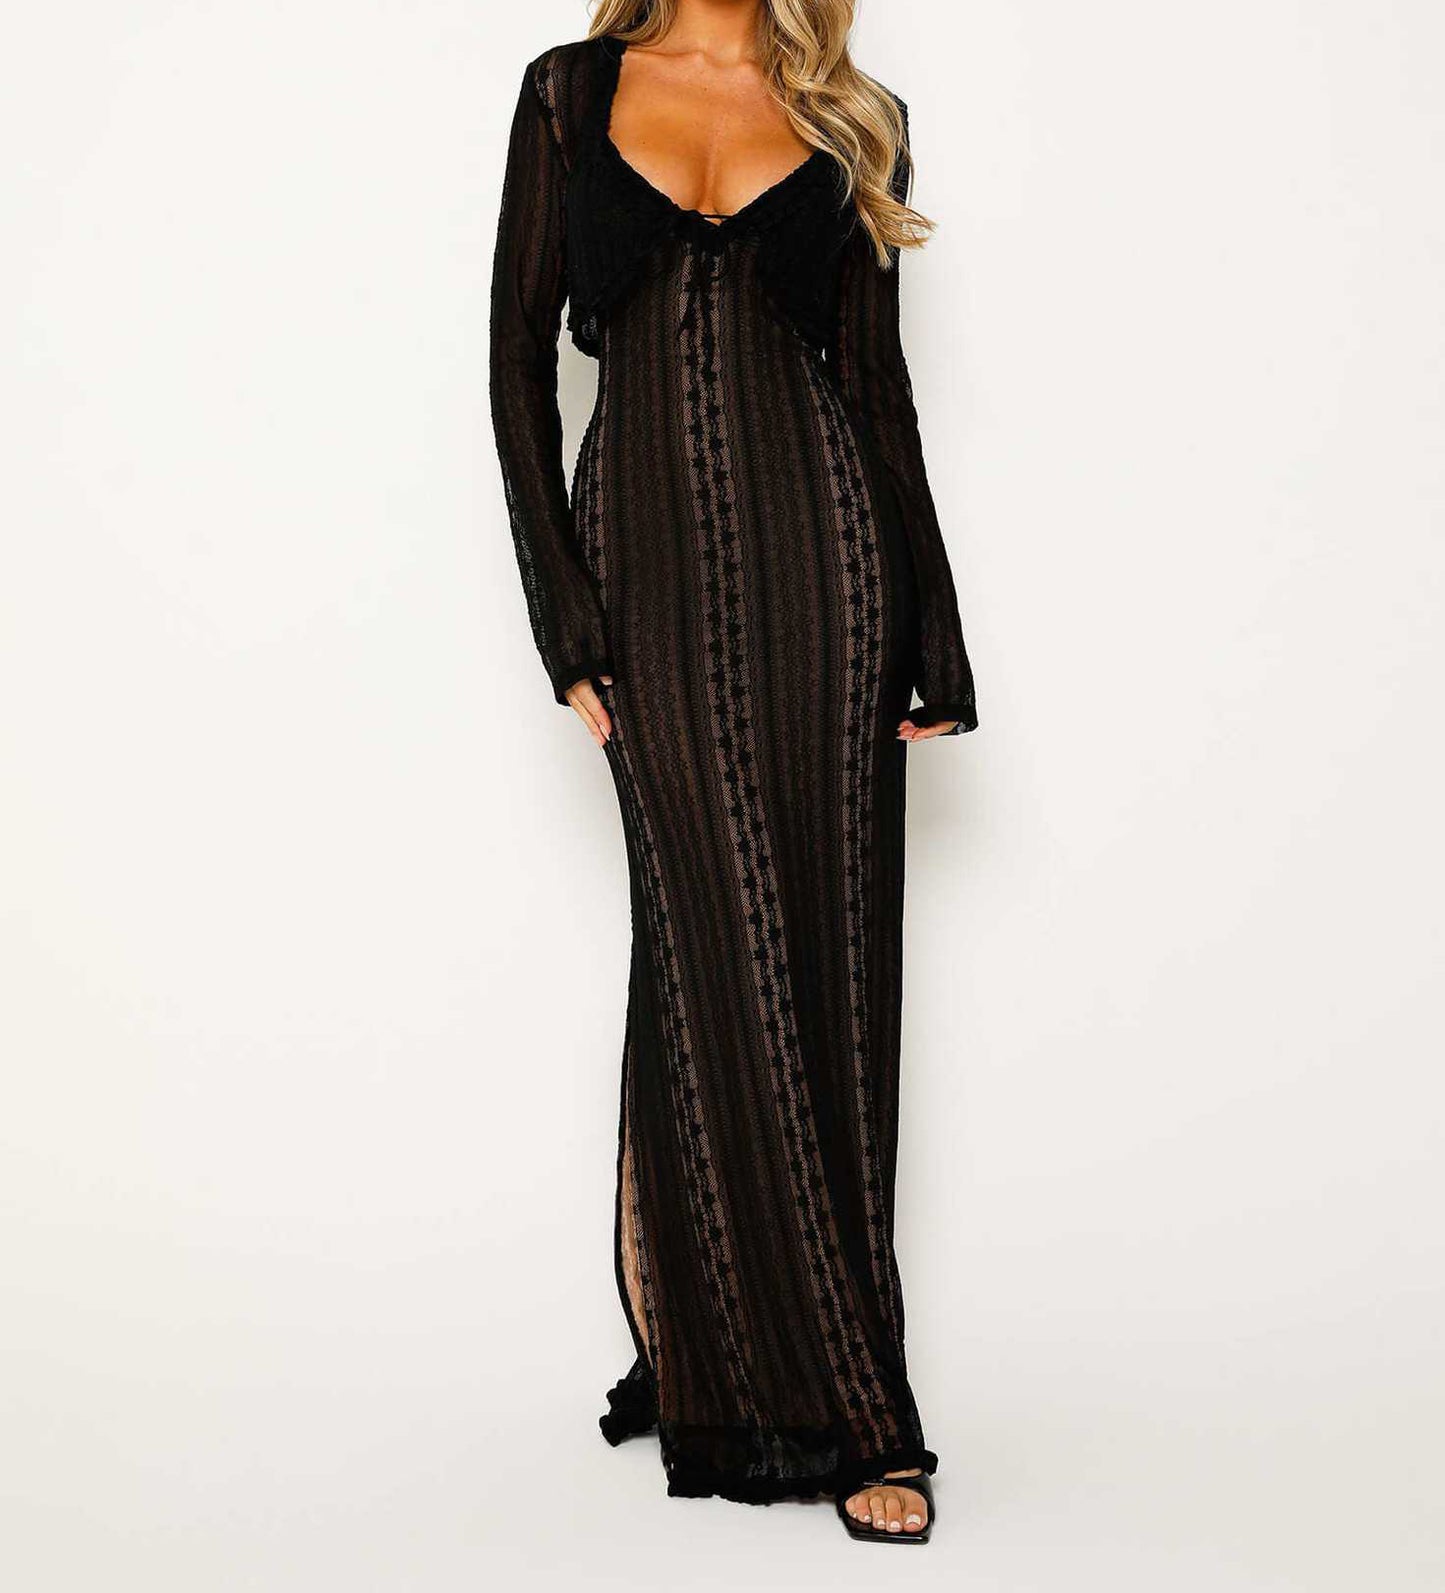 Lace V Neck Maxi Dress And Lace Cardigan